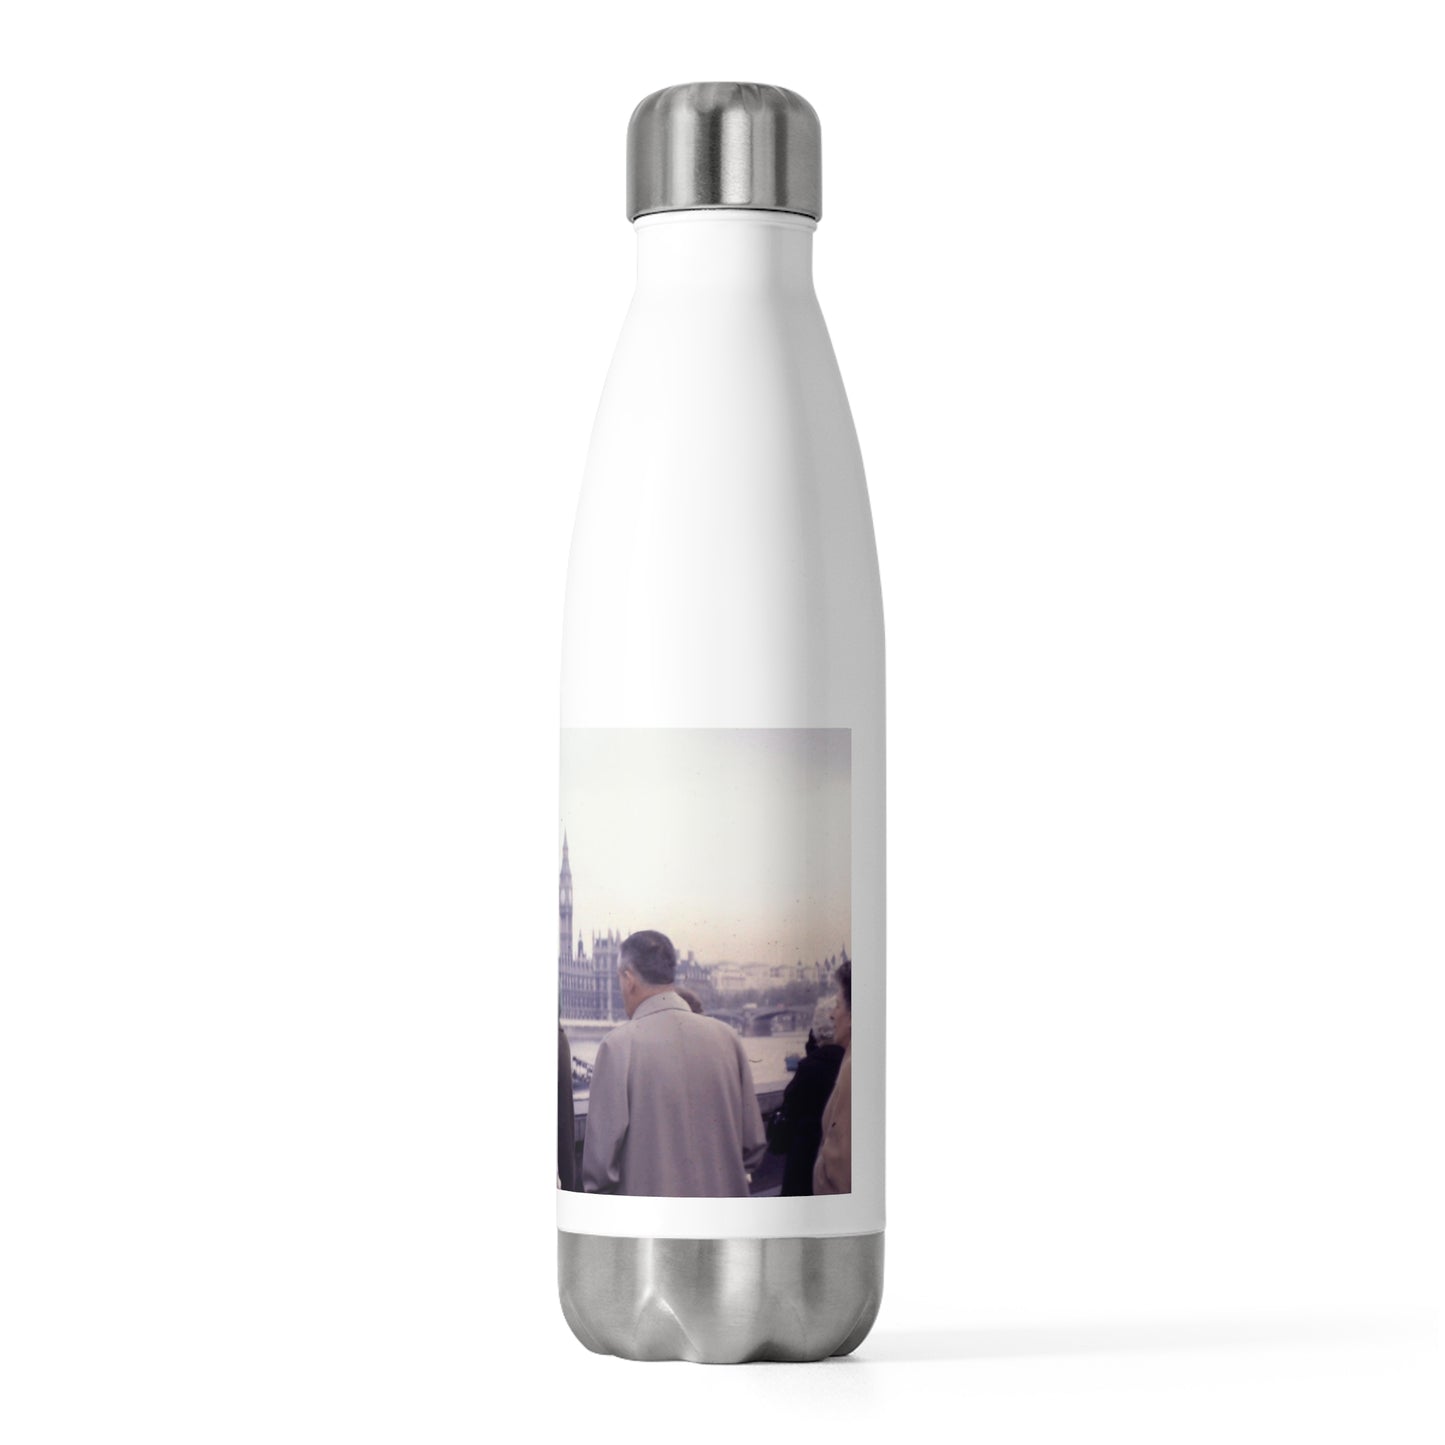 Europe 1967 No 3 20oz Insulated Bottle